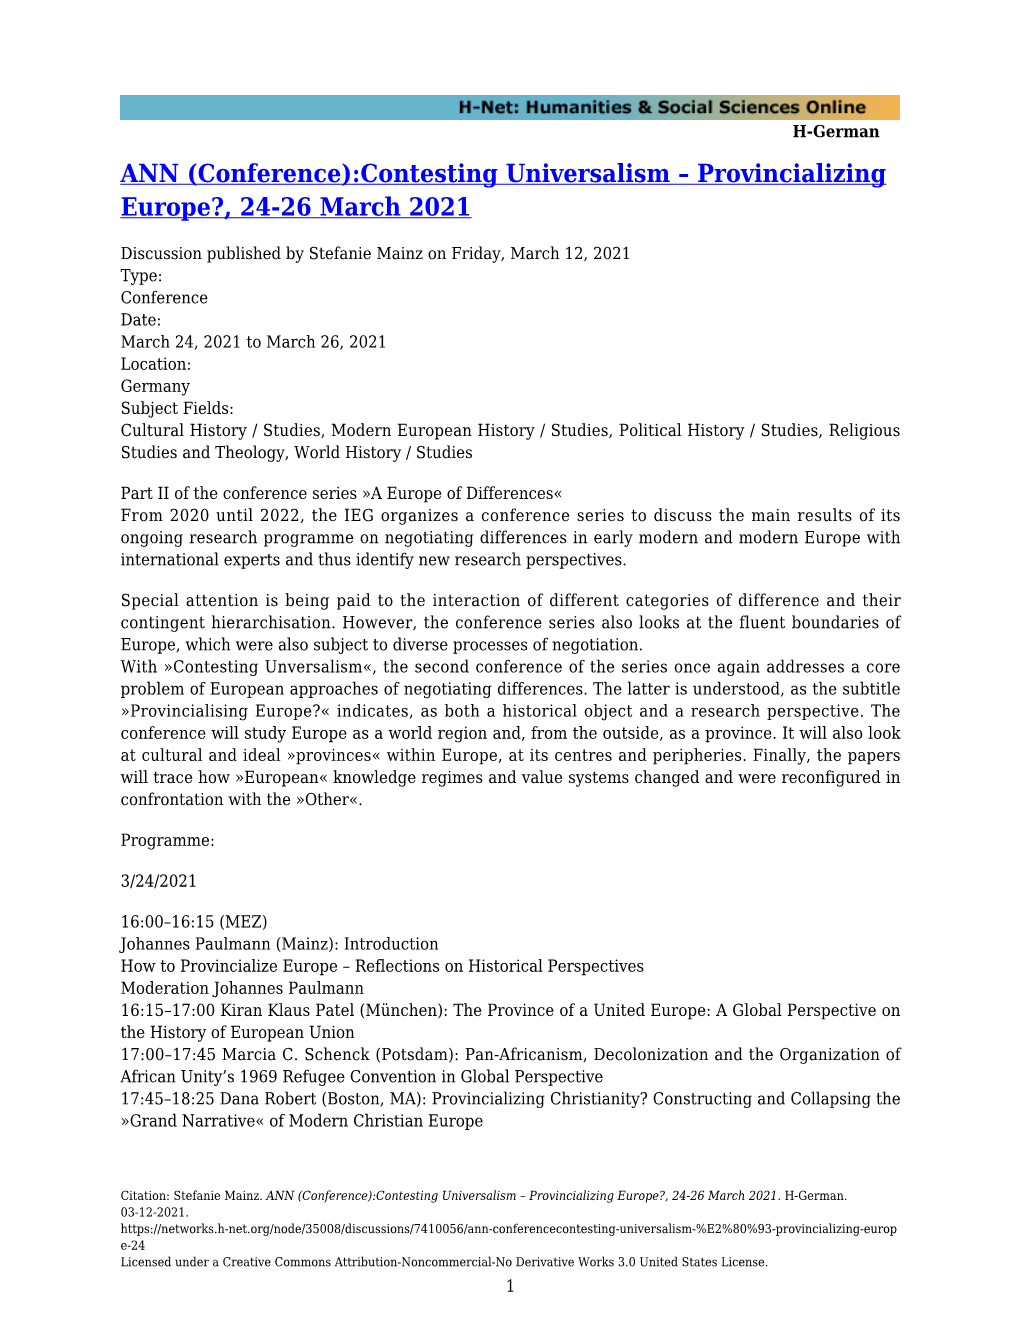 Provincializing Europe?, 24-26 March 2021